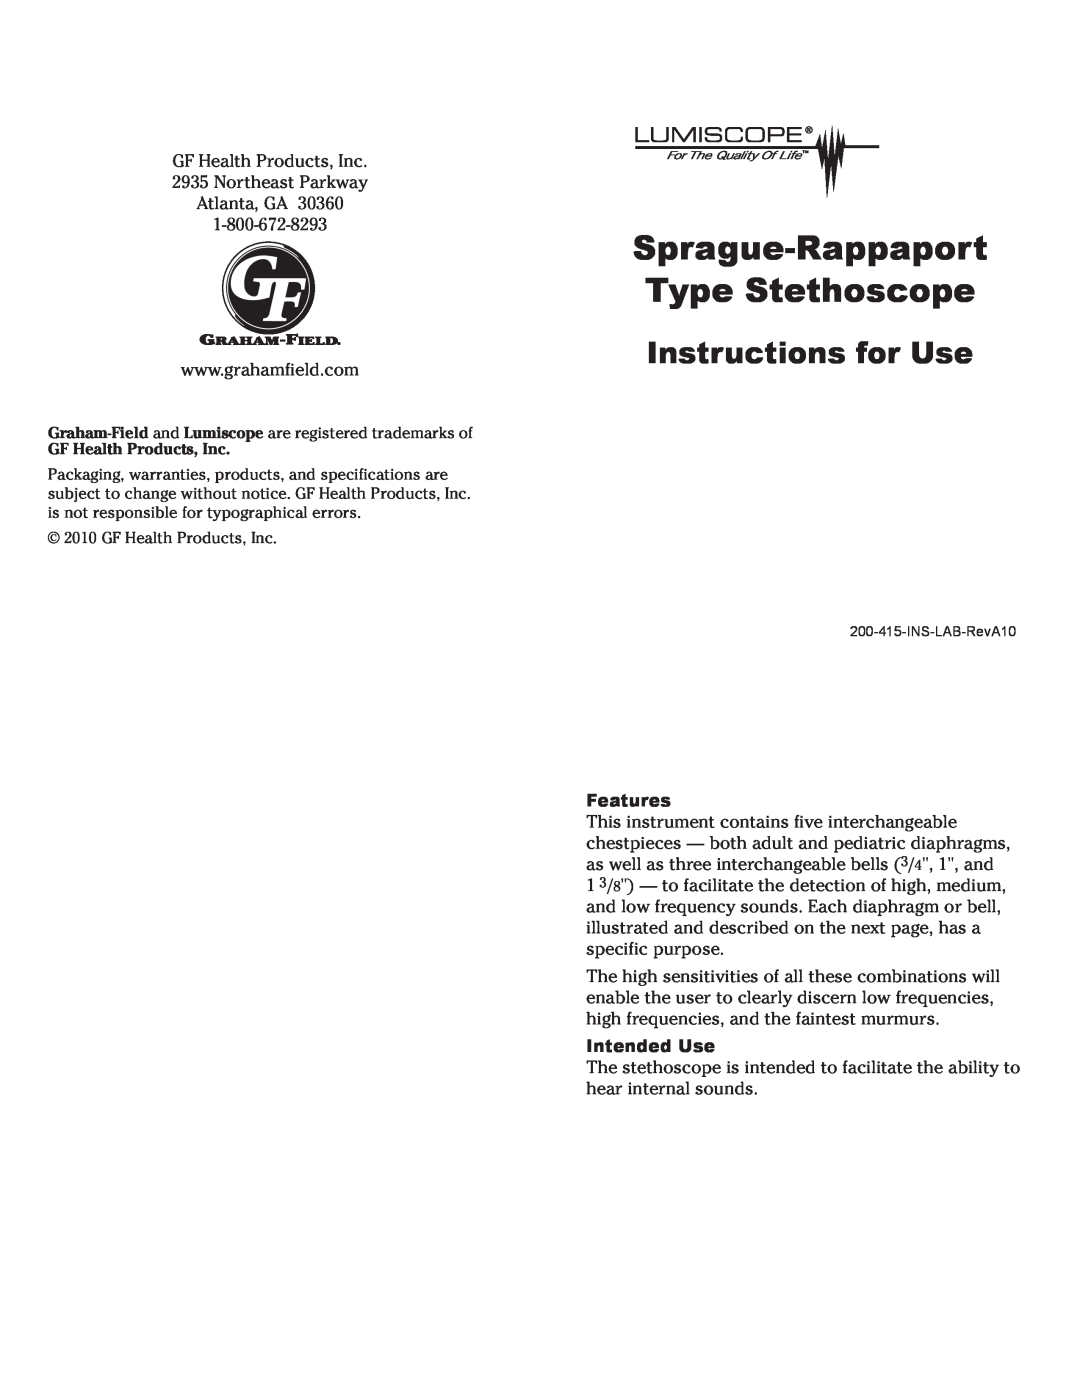 Lumiscope 200-415-INS-LAB-RevA10 specifications Sprague-Rappaport Type Stethoscope, Instructions for Use 